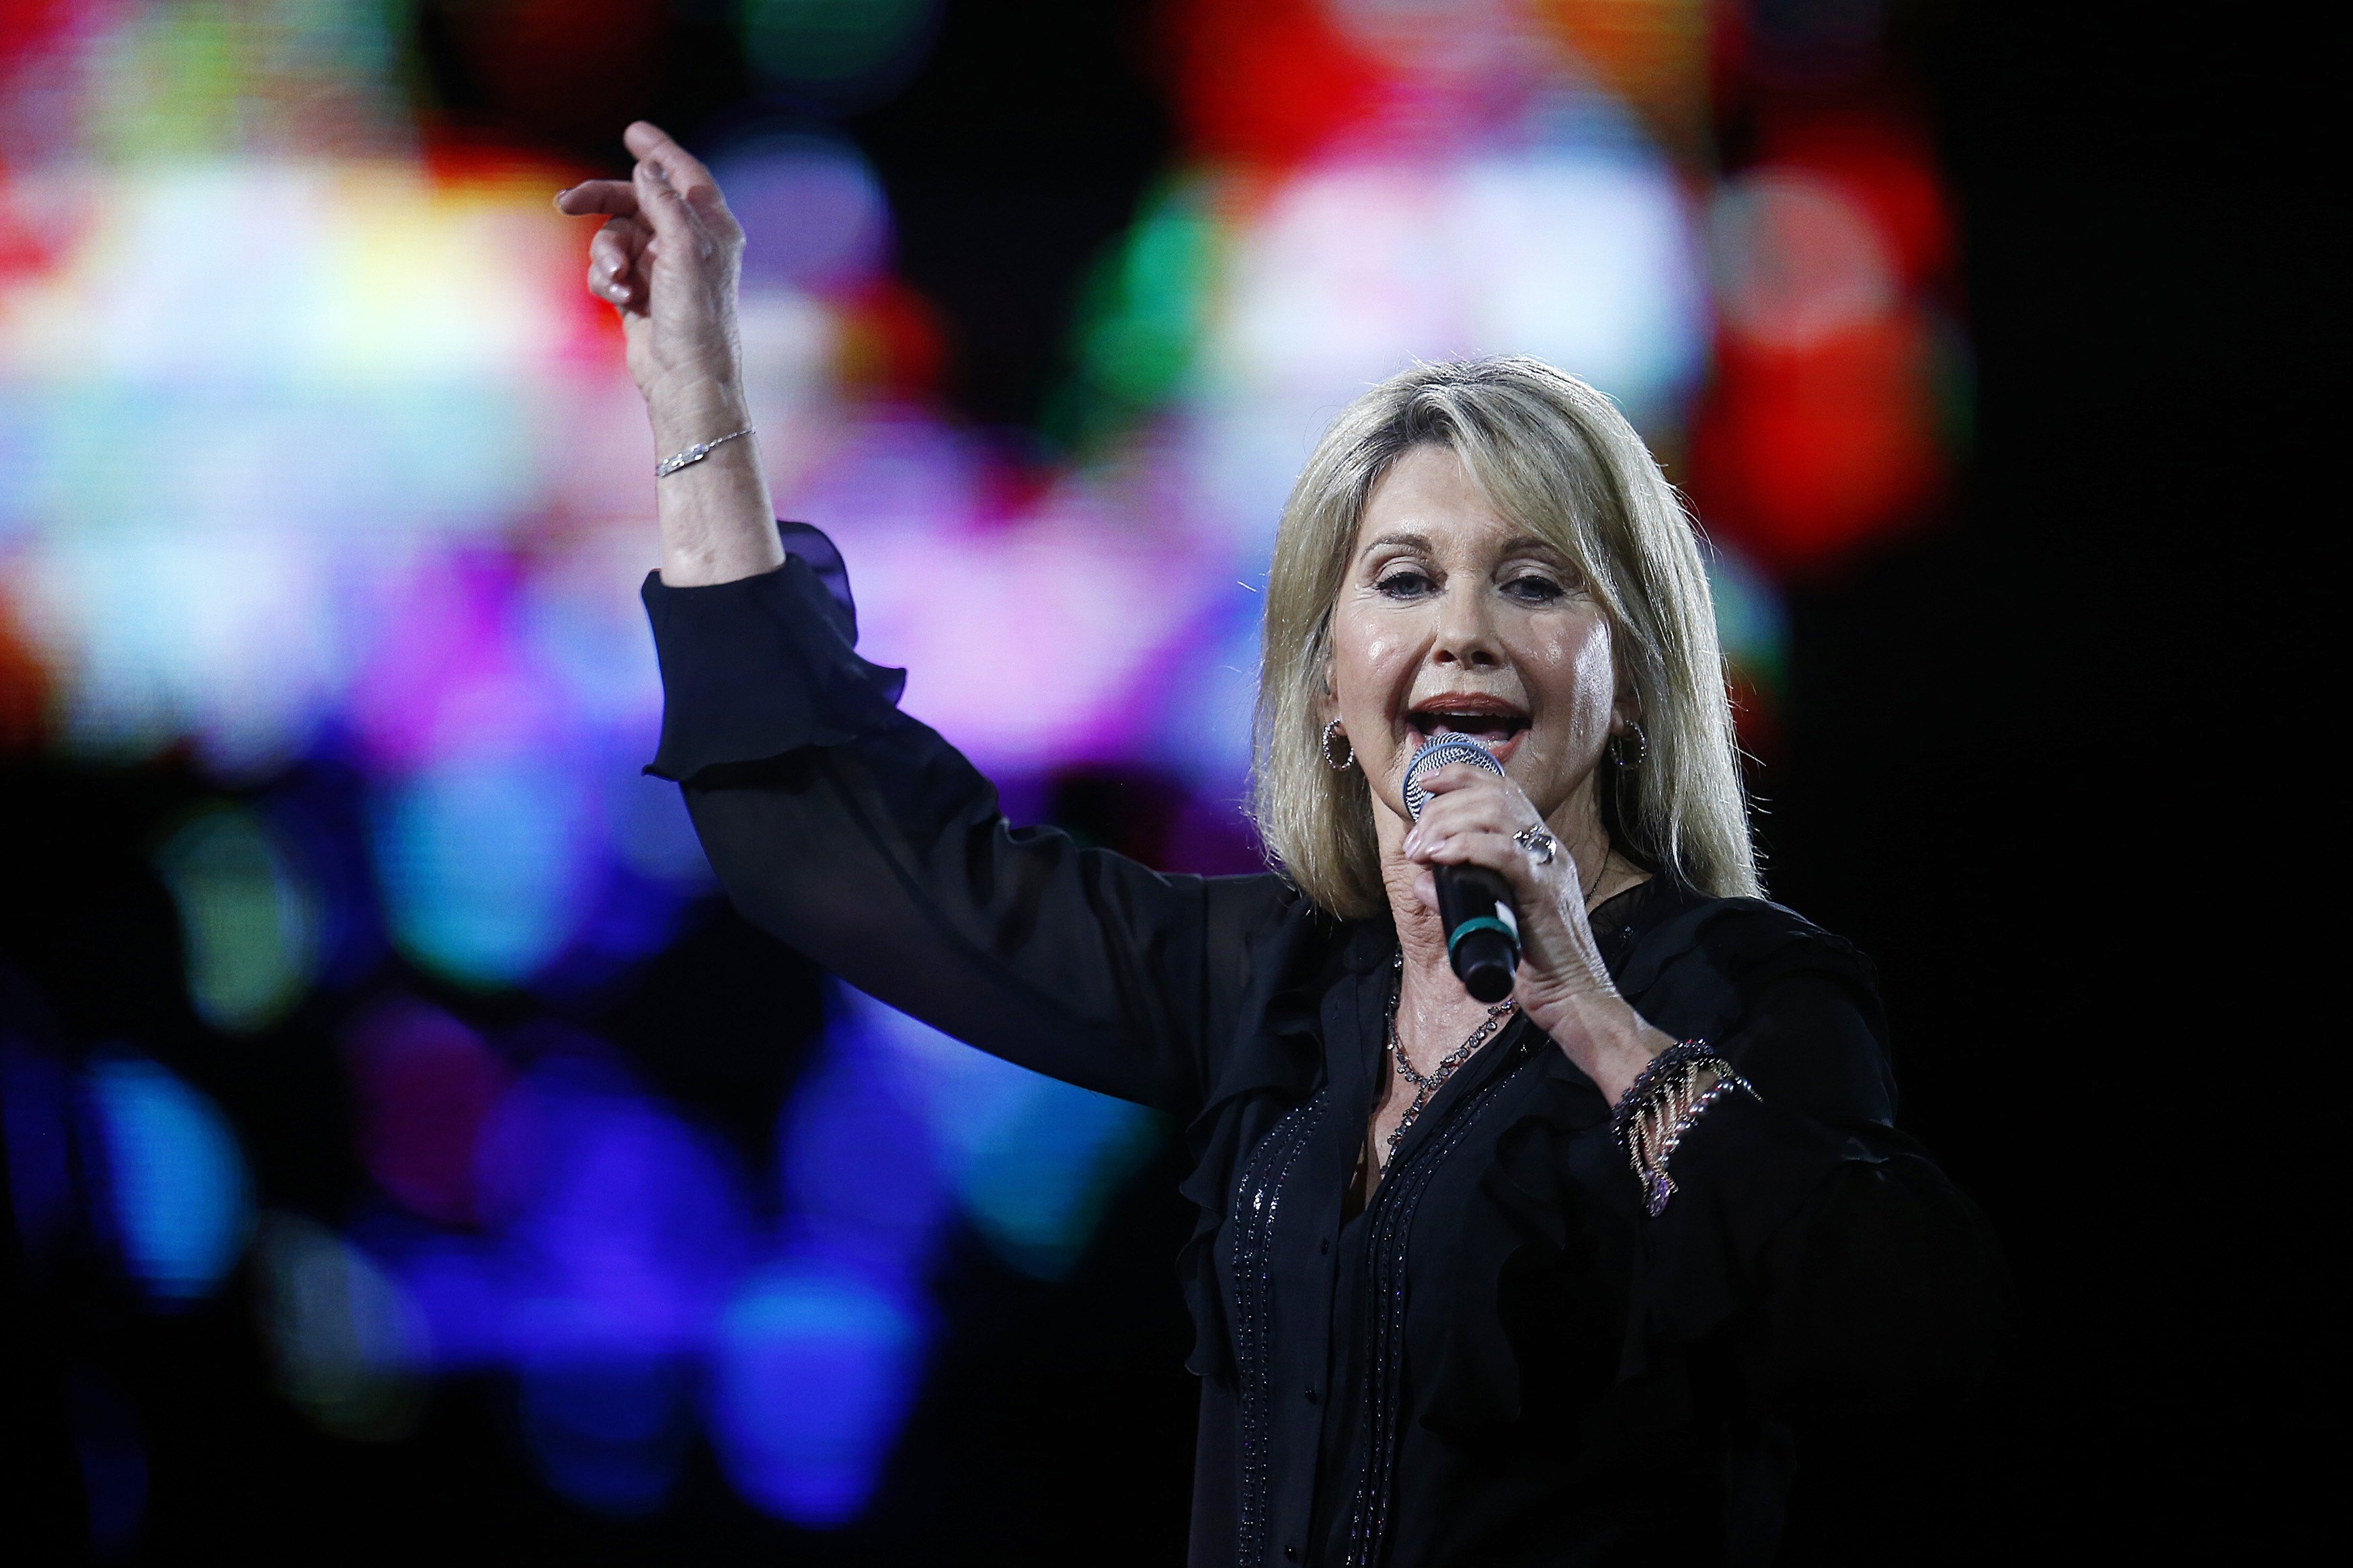 Olivia Newton-John used medicinal cannabis to help with breast cancer pain